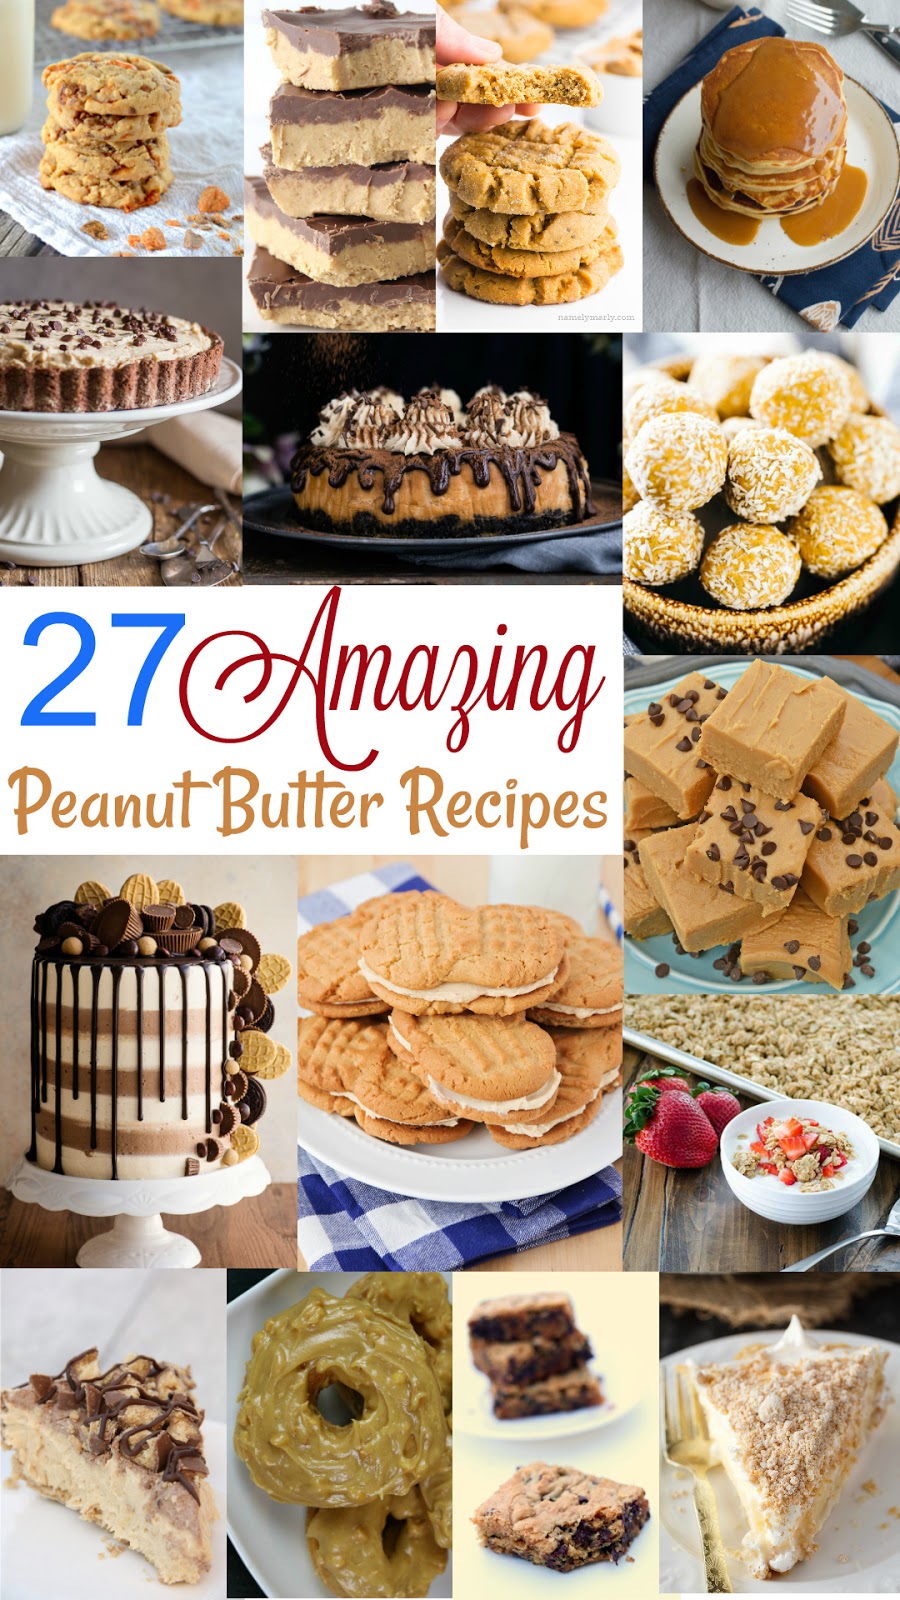 27 amazing and delicious peanut butter recipes, perfect for celebration national peanut butter lovers day!